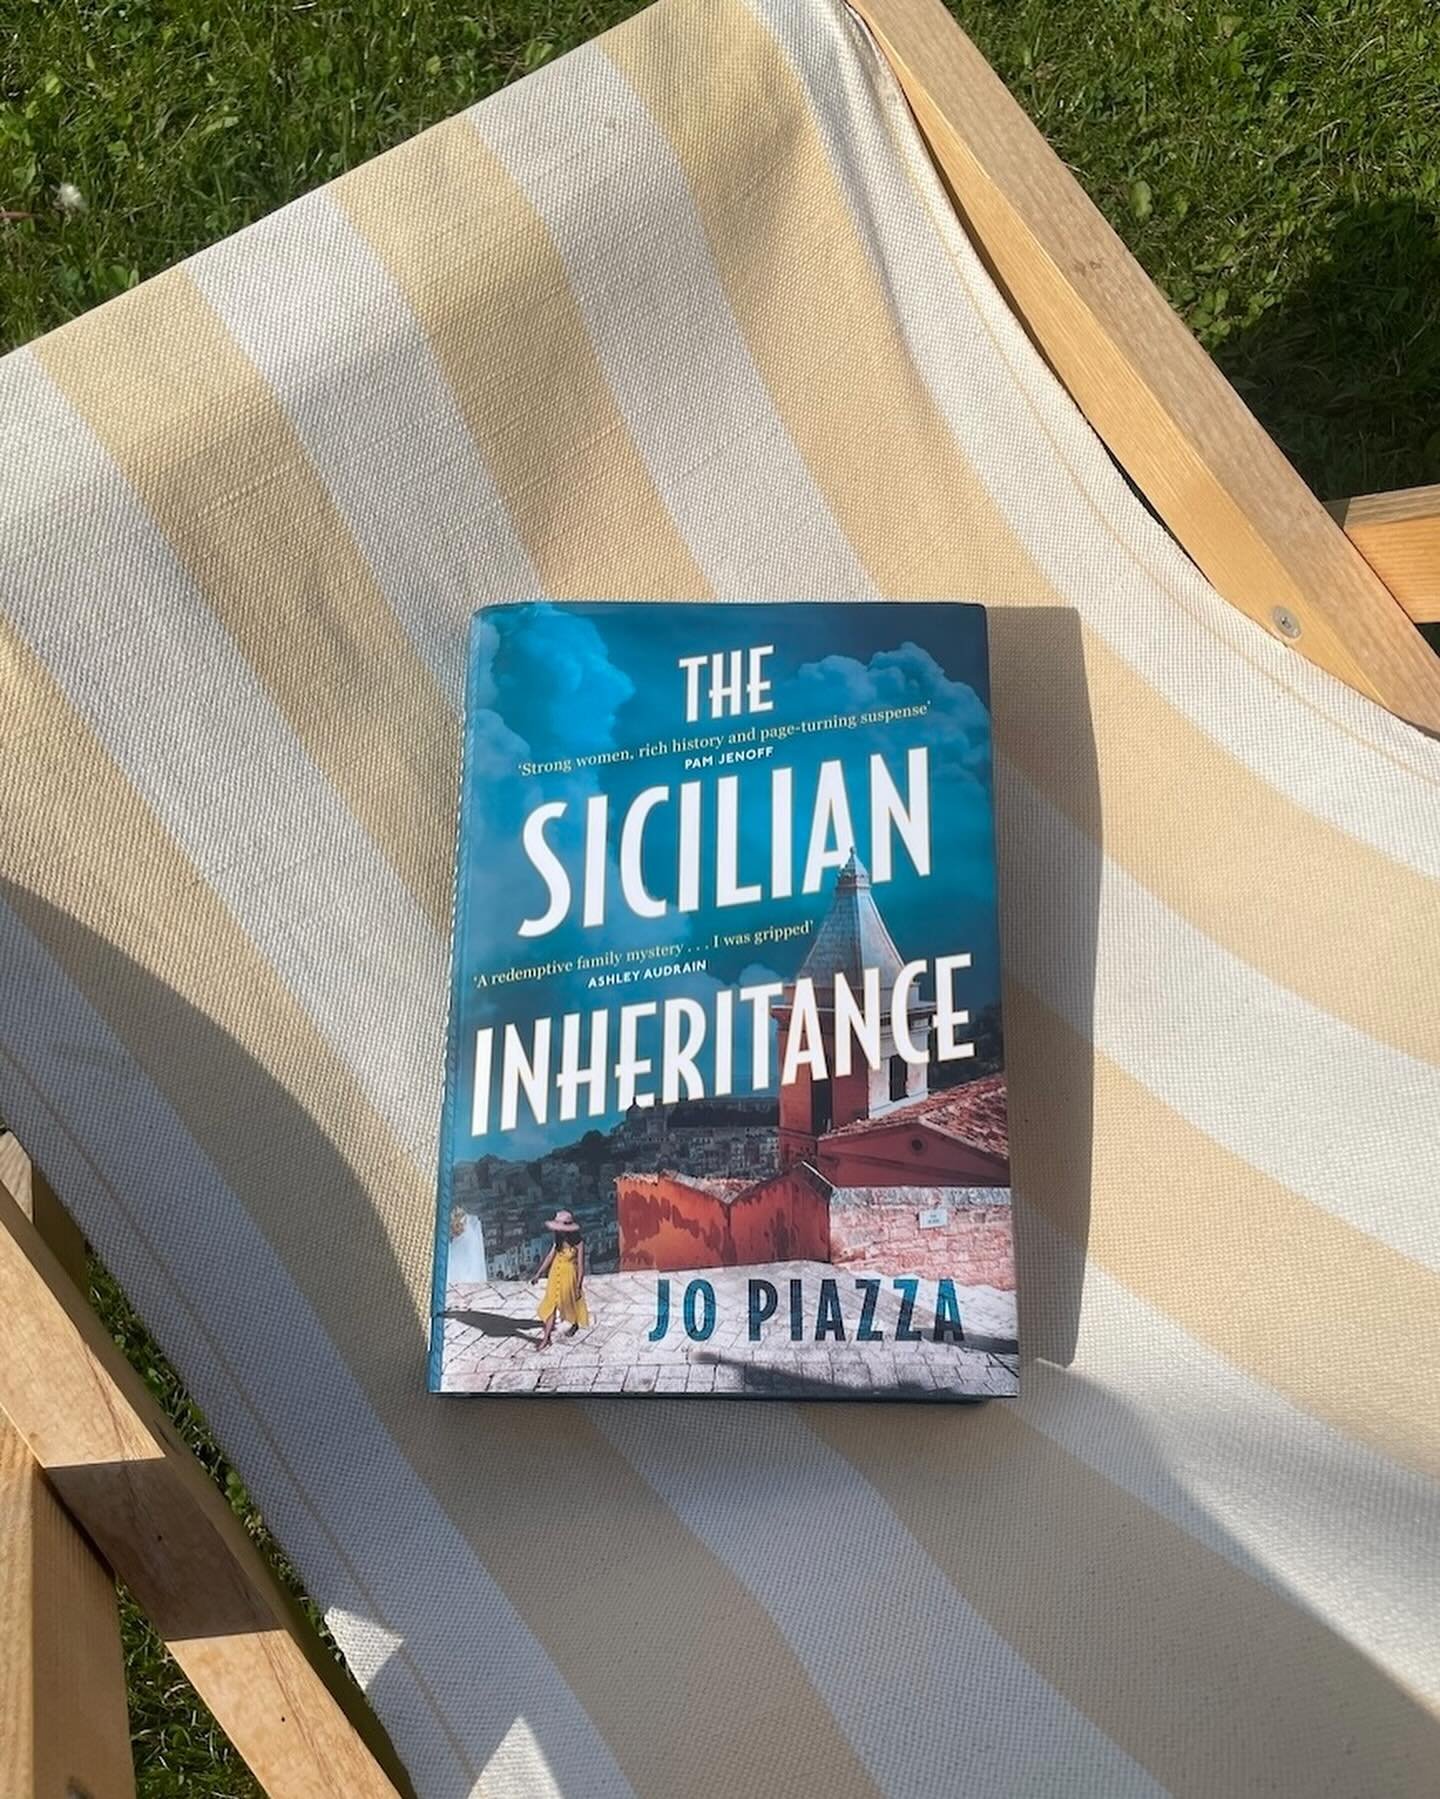 It&rsquo;s beach read time! Our May Book of the Month features our favorite multi-hyphenate, Jo Piazza, whose podcast &ldquo;Under the Influence&rdquo; has so thoughtfully woven the role of social media in our (and our kids&rsquo;!) lives for years&m